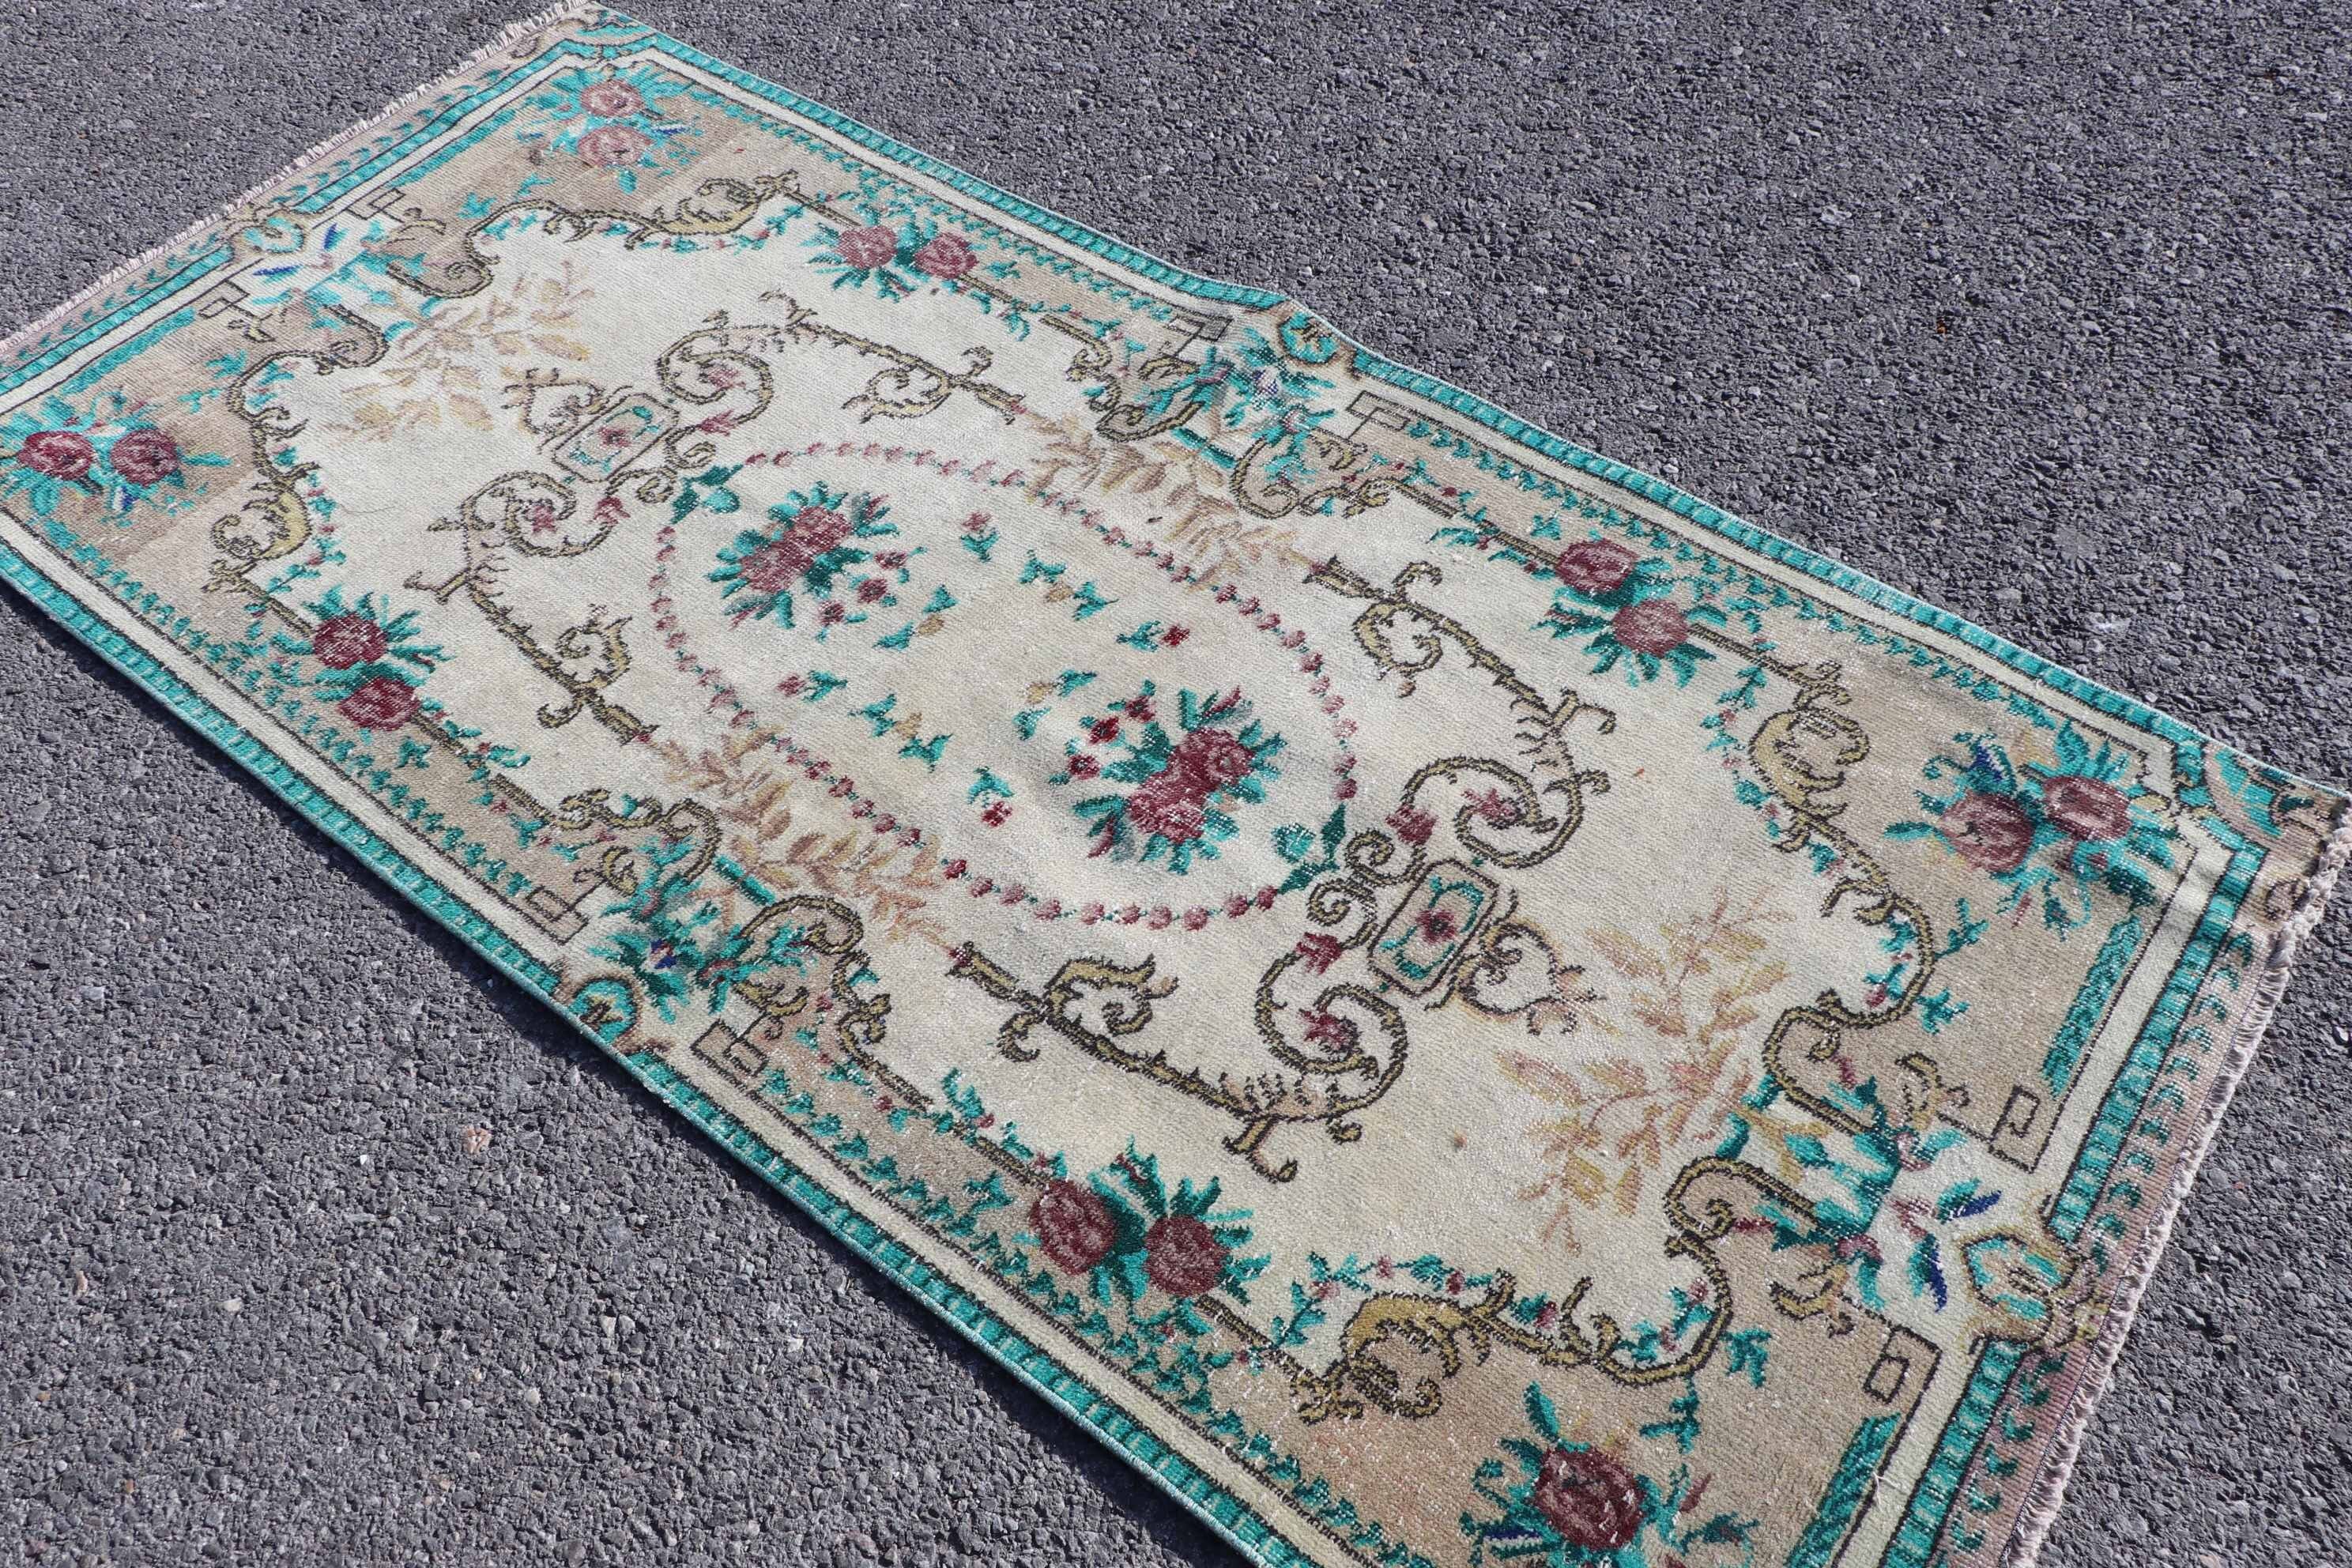 Rugs for Kitchen, Floor Rug, Entry Rug, Turkish Rug, Bedroom Rugs, Office Rugs, 3.1x6.8 ft Accent Rugs, Blue Antique Rug, Vintage Rugs